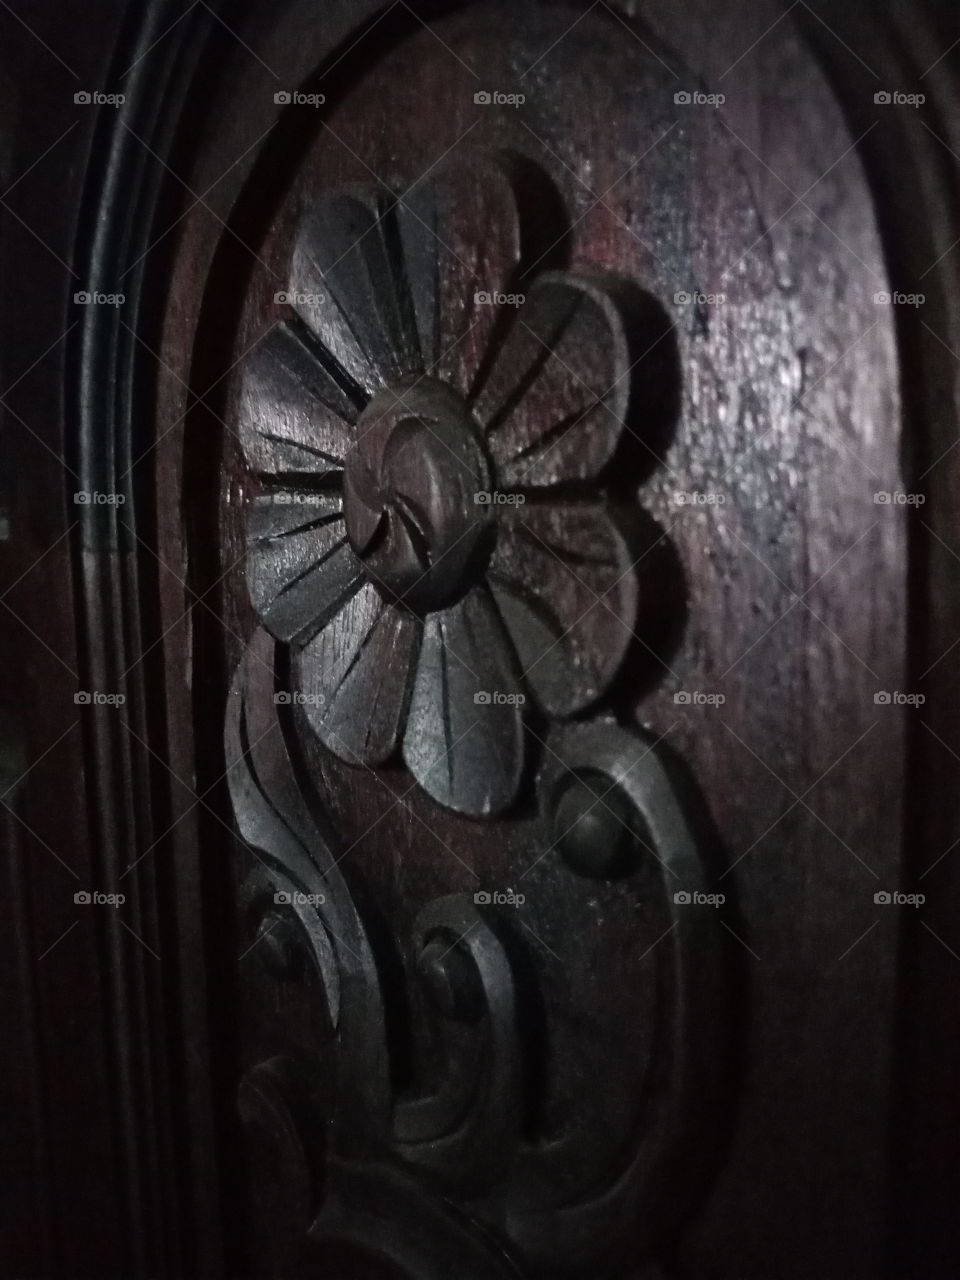 The woid sculpture in the shape of flower on the wood door